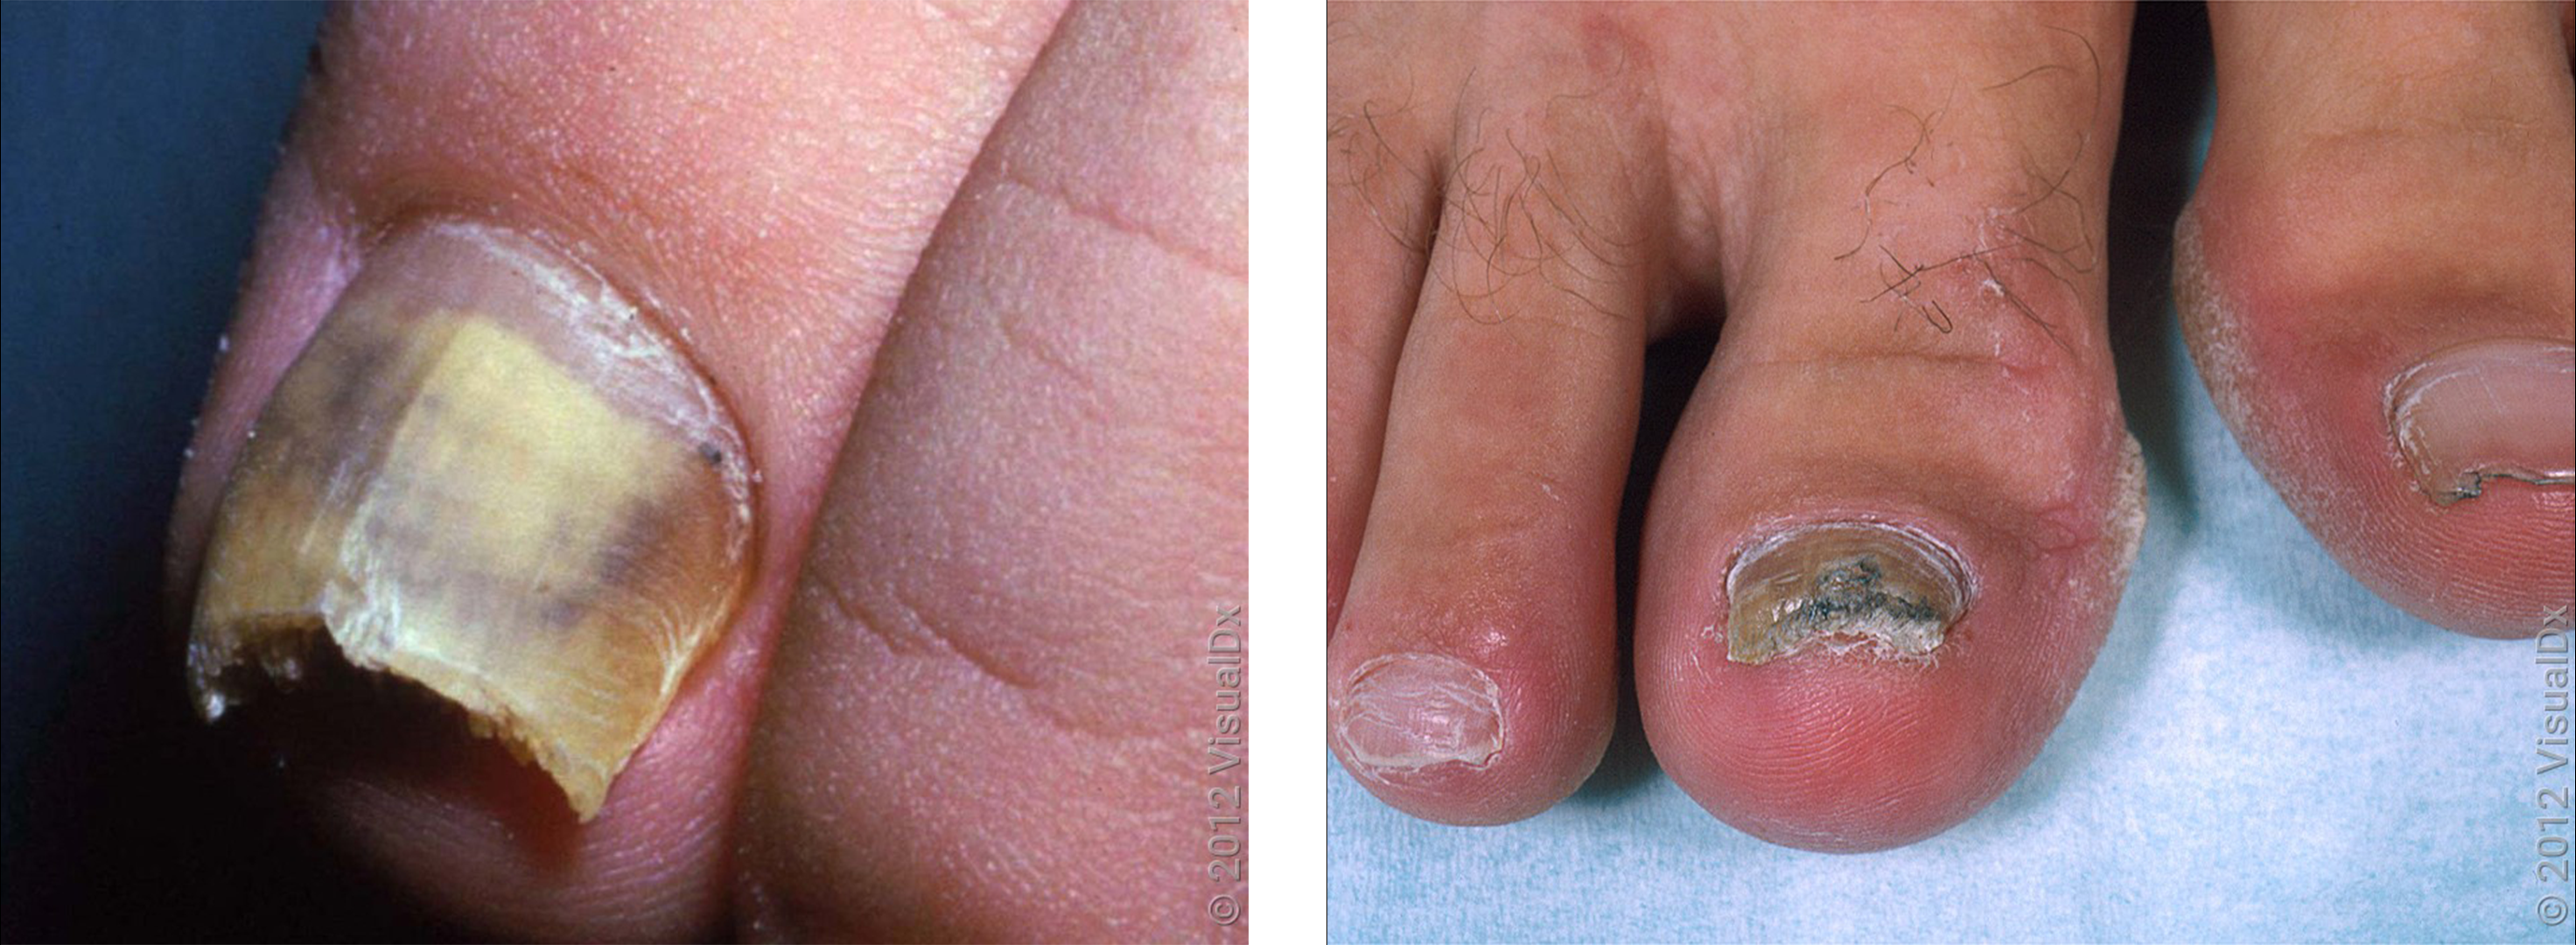 All You Need To Know About Fungal Nails